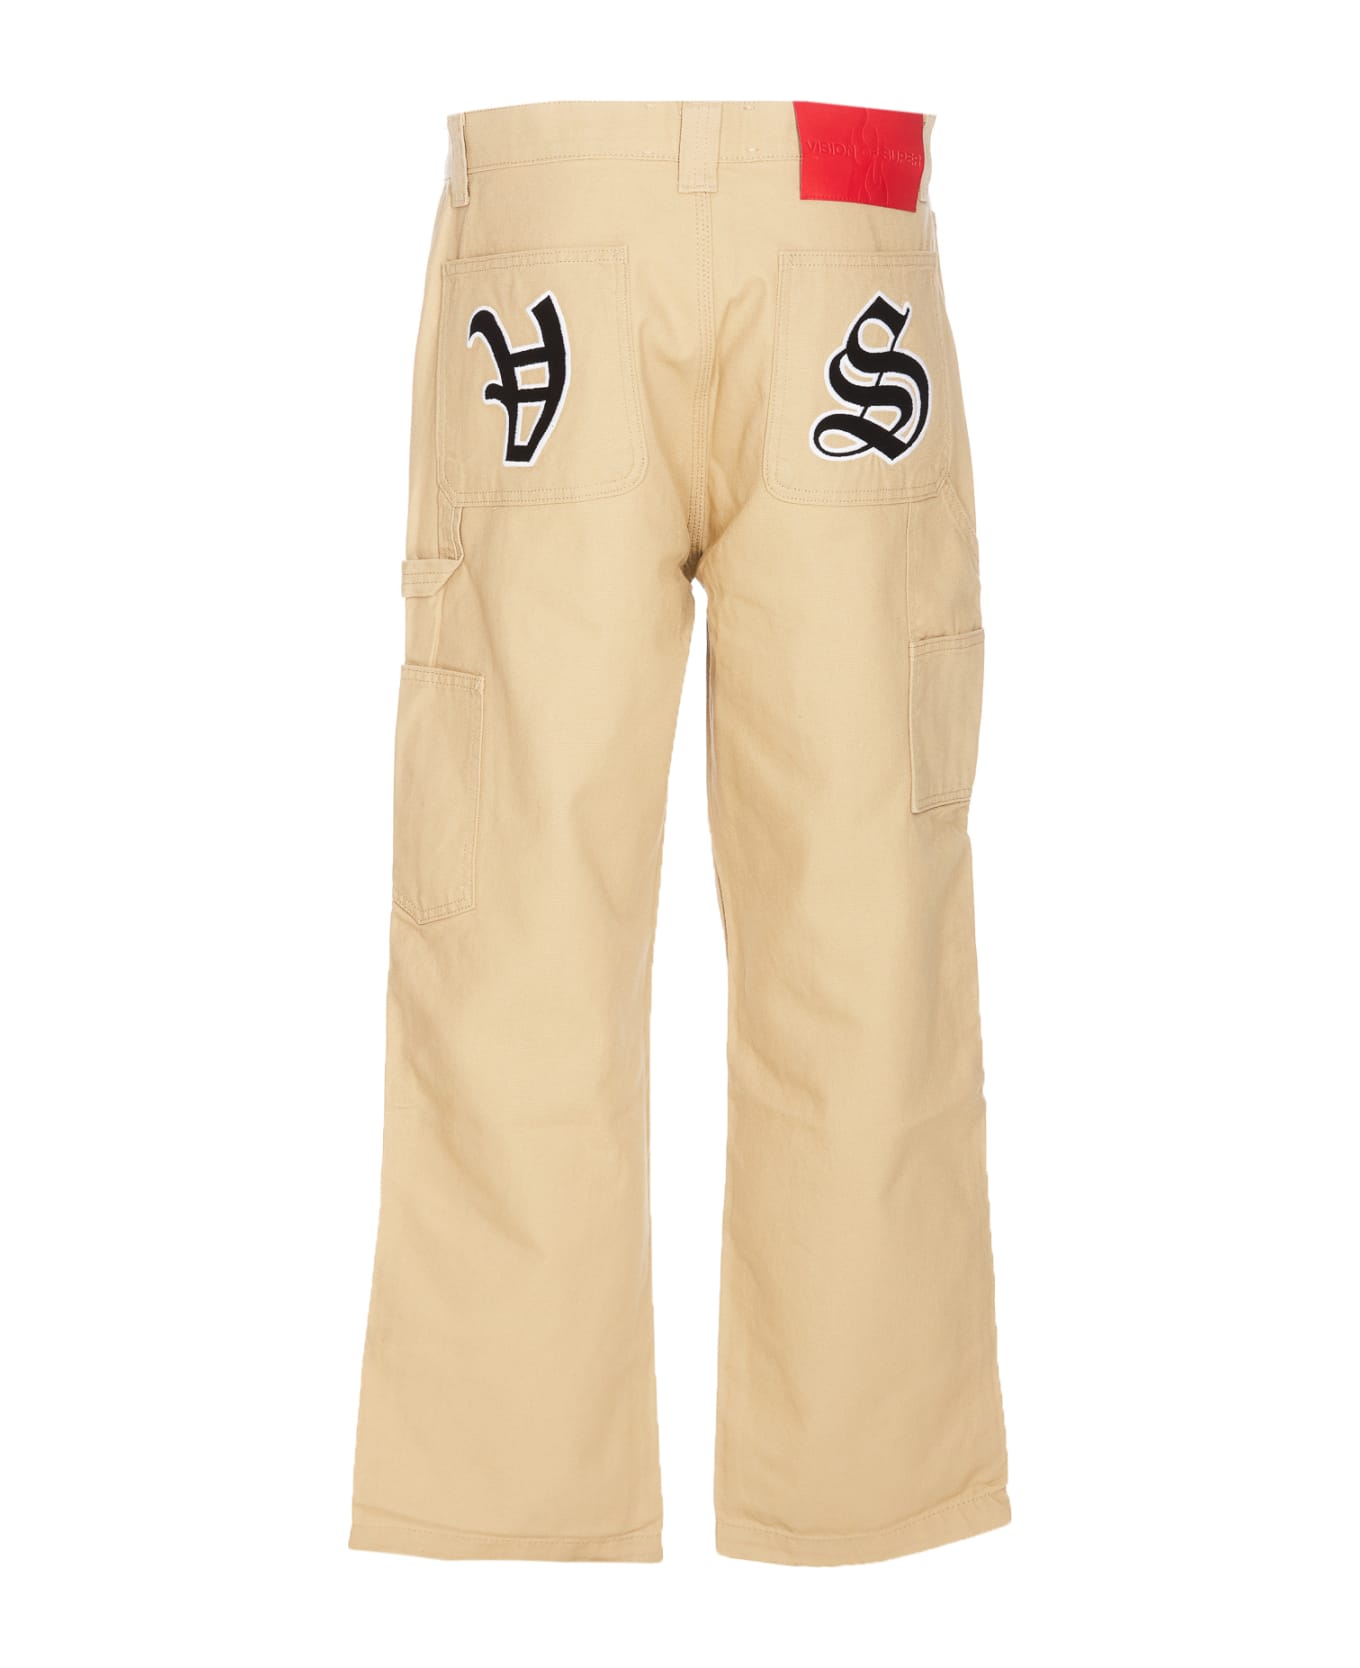 Vision of Super Sand Worker Pants With V-s Gothic Patches - Beige